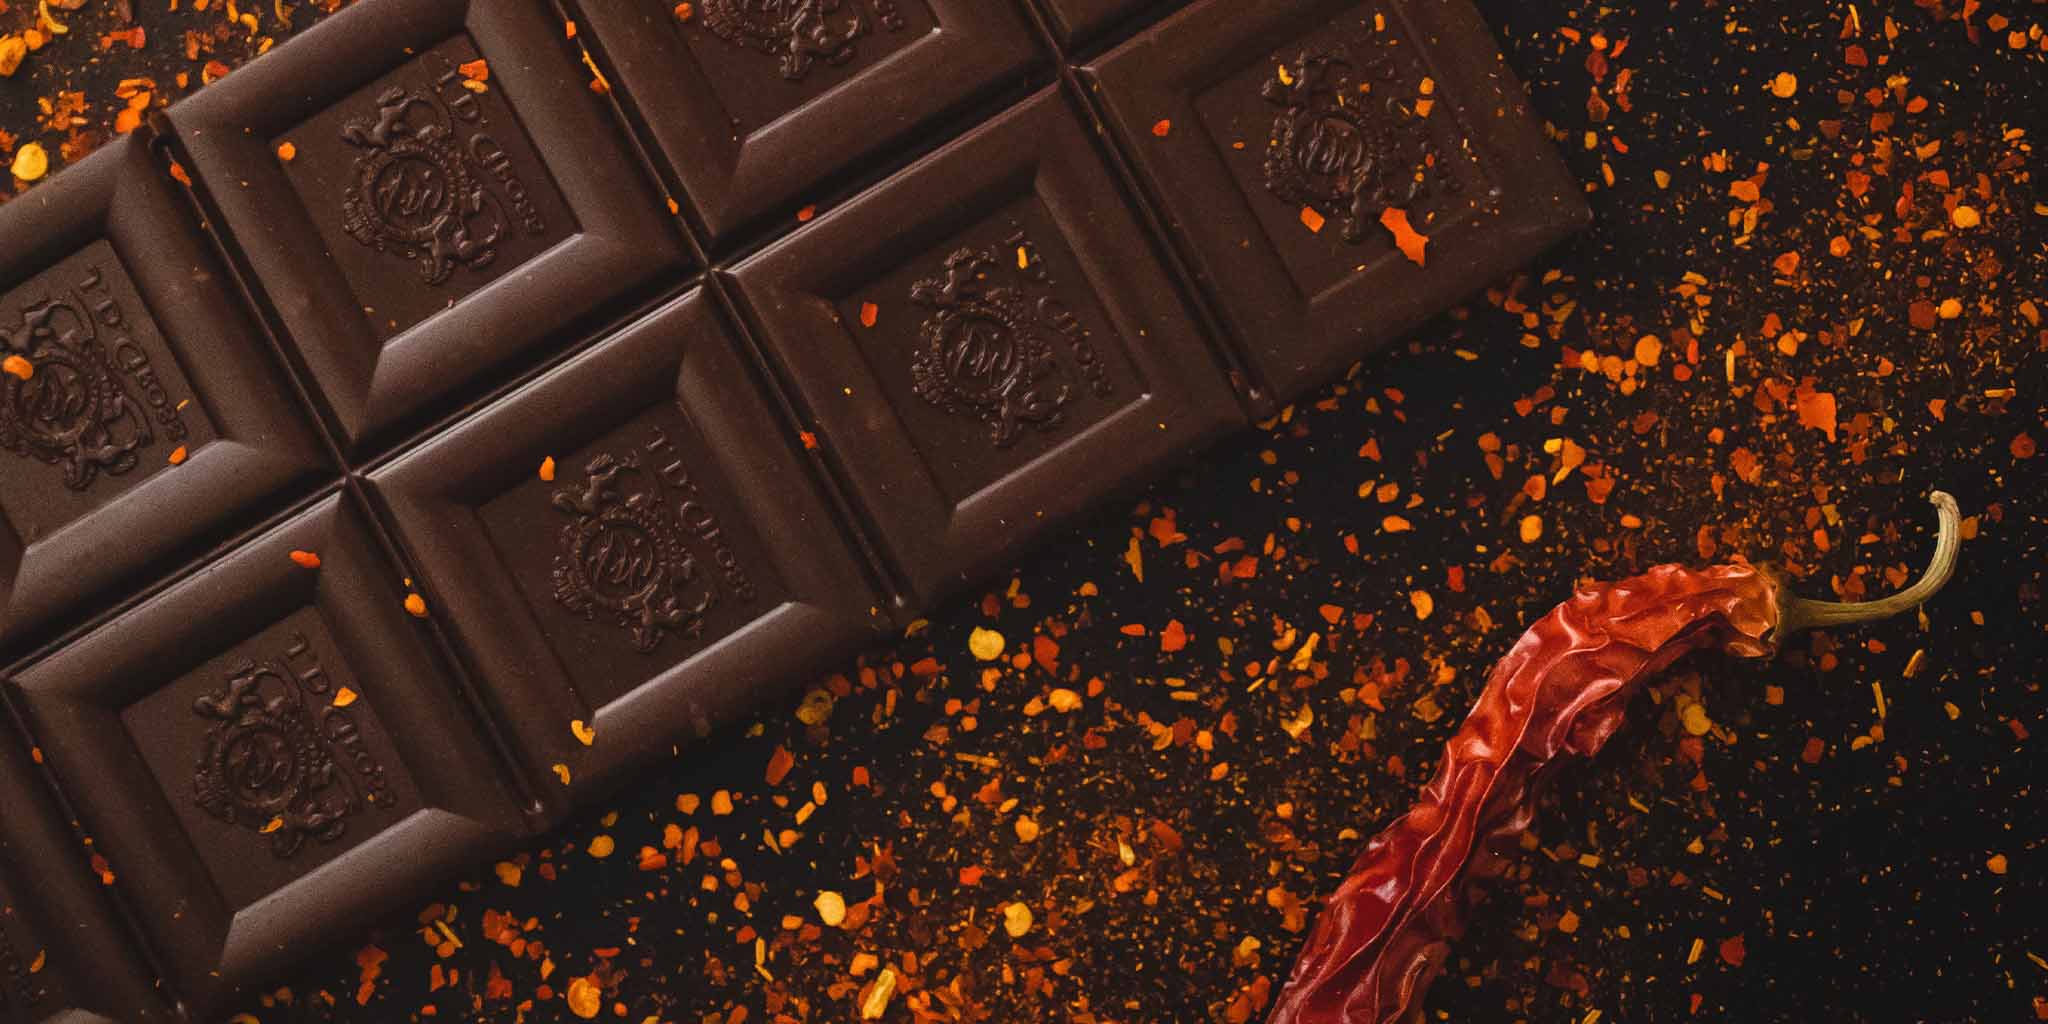 Closeup of a luxurious bar of dark chocolate sprinkled with dried chili flakes; a dried red chili sits casually beside the bar of chocolate